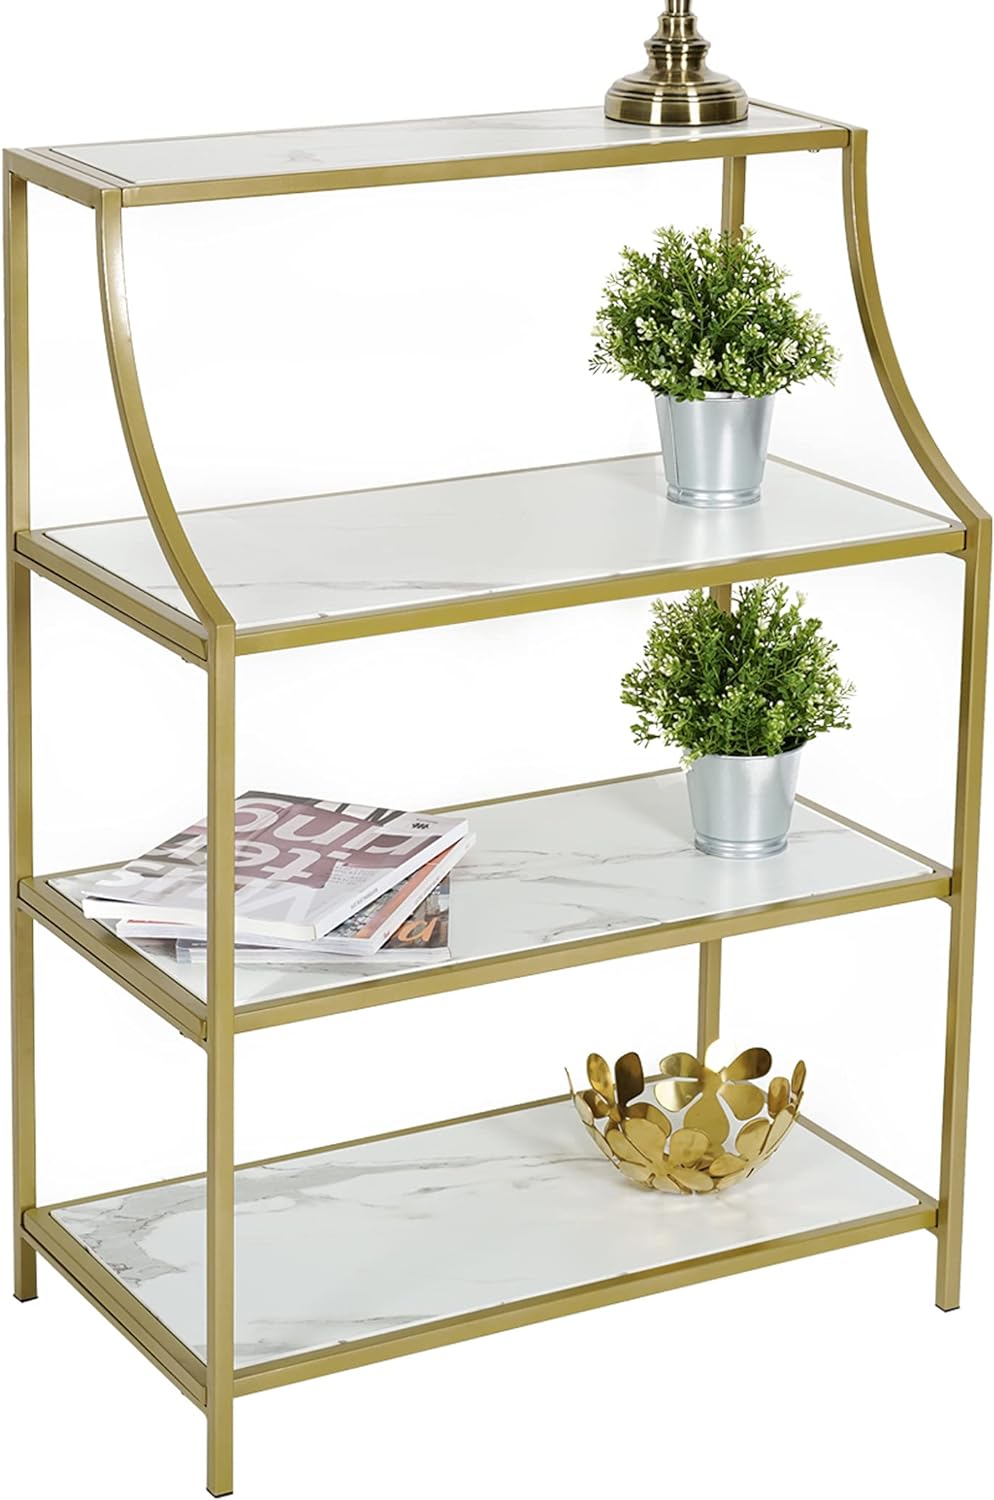 Moncot Narrow Console Table, Entryway Table, Gold Metal Frame White Marble Texture MDF Top with 4-Tier Shelving Storage, Modern Sofa Table for Hallway, Living Room, Behind Sofa (White Gold)